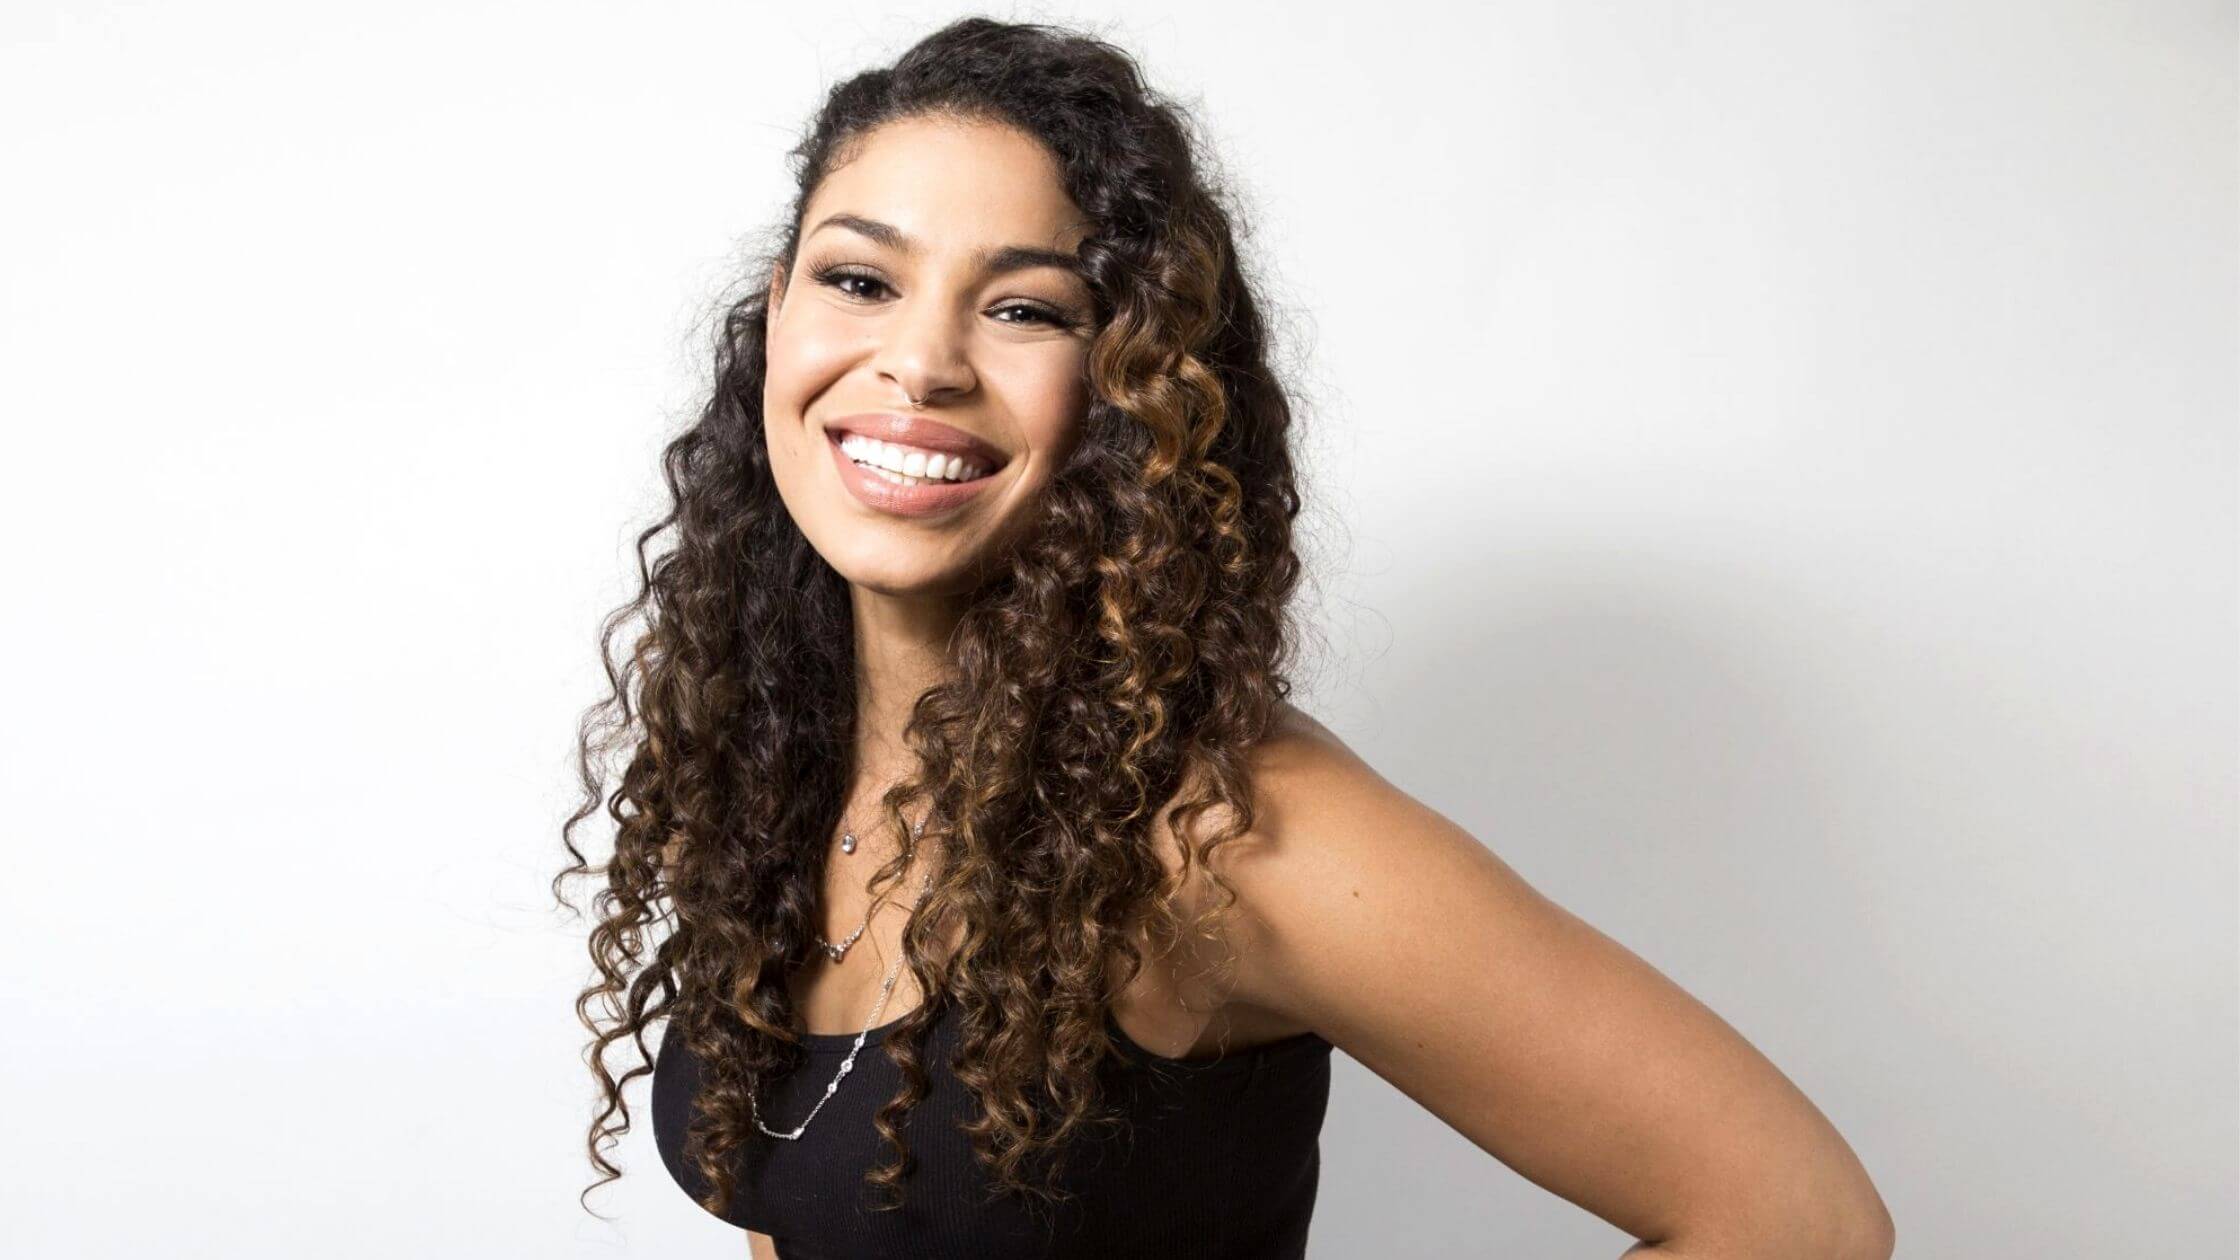 Jordin Sparks Net Worth 2022!! Bio, American Idol, Son, Tattoo, Age, Husband, No Air, Audition, And More